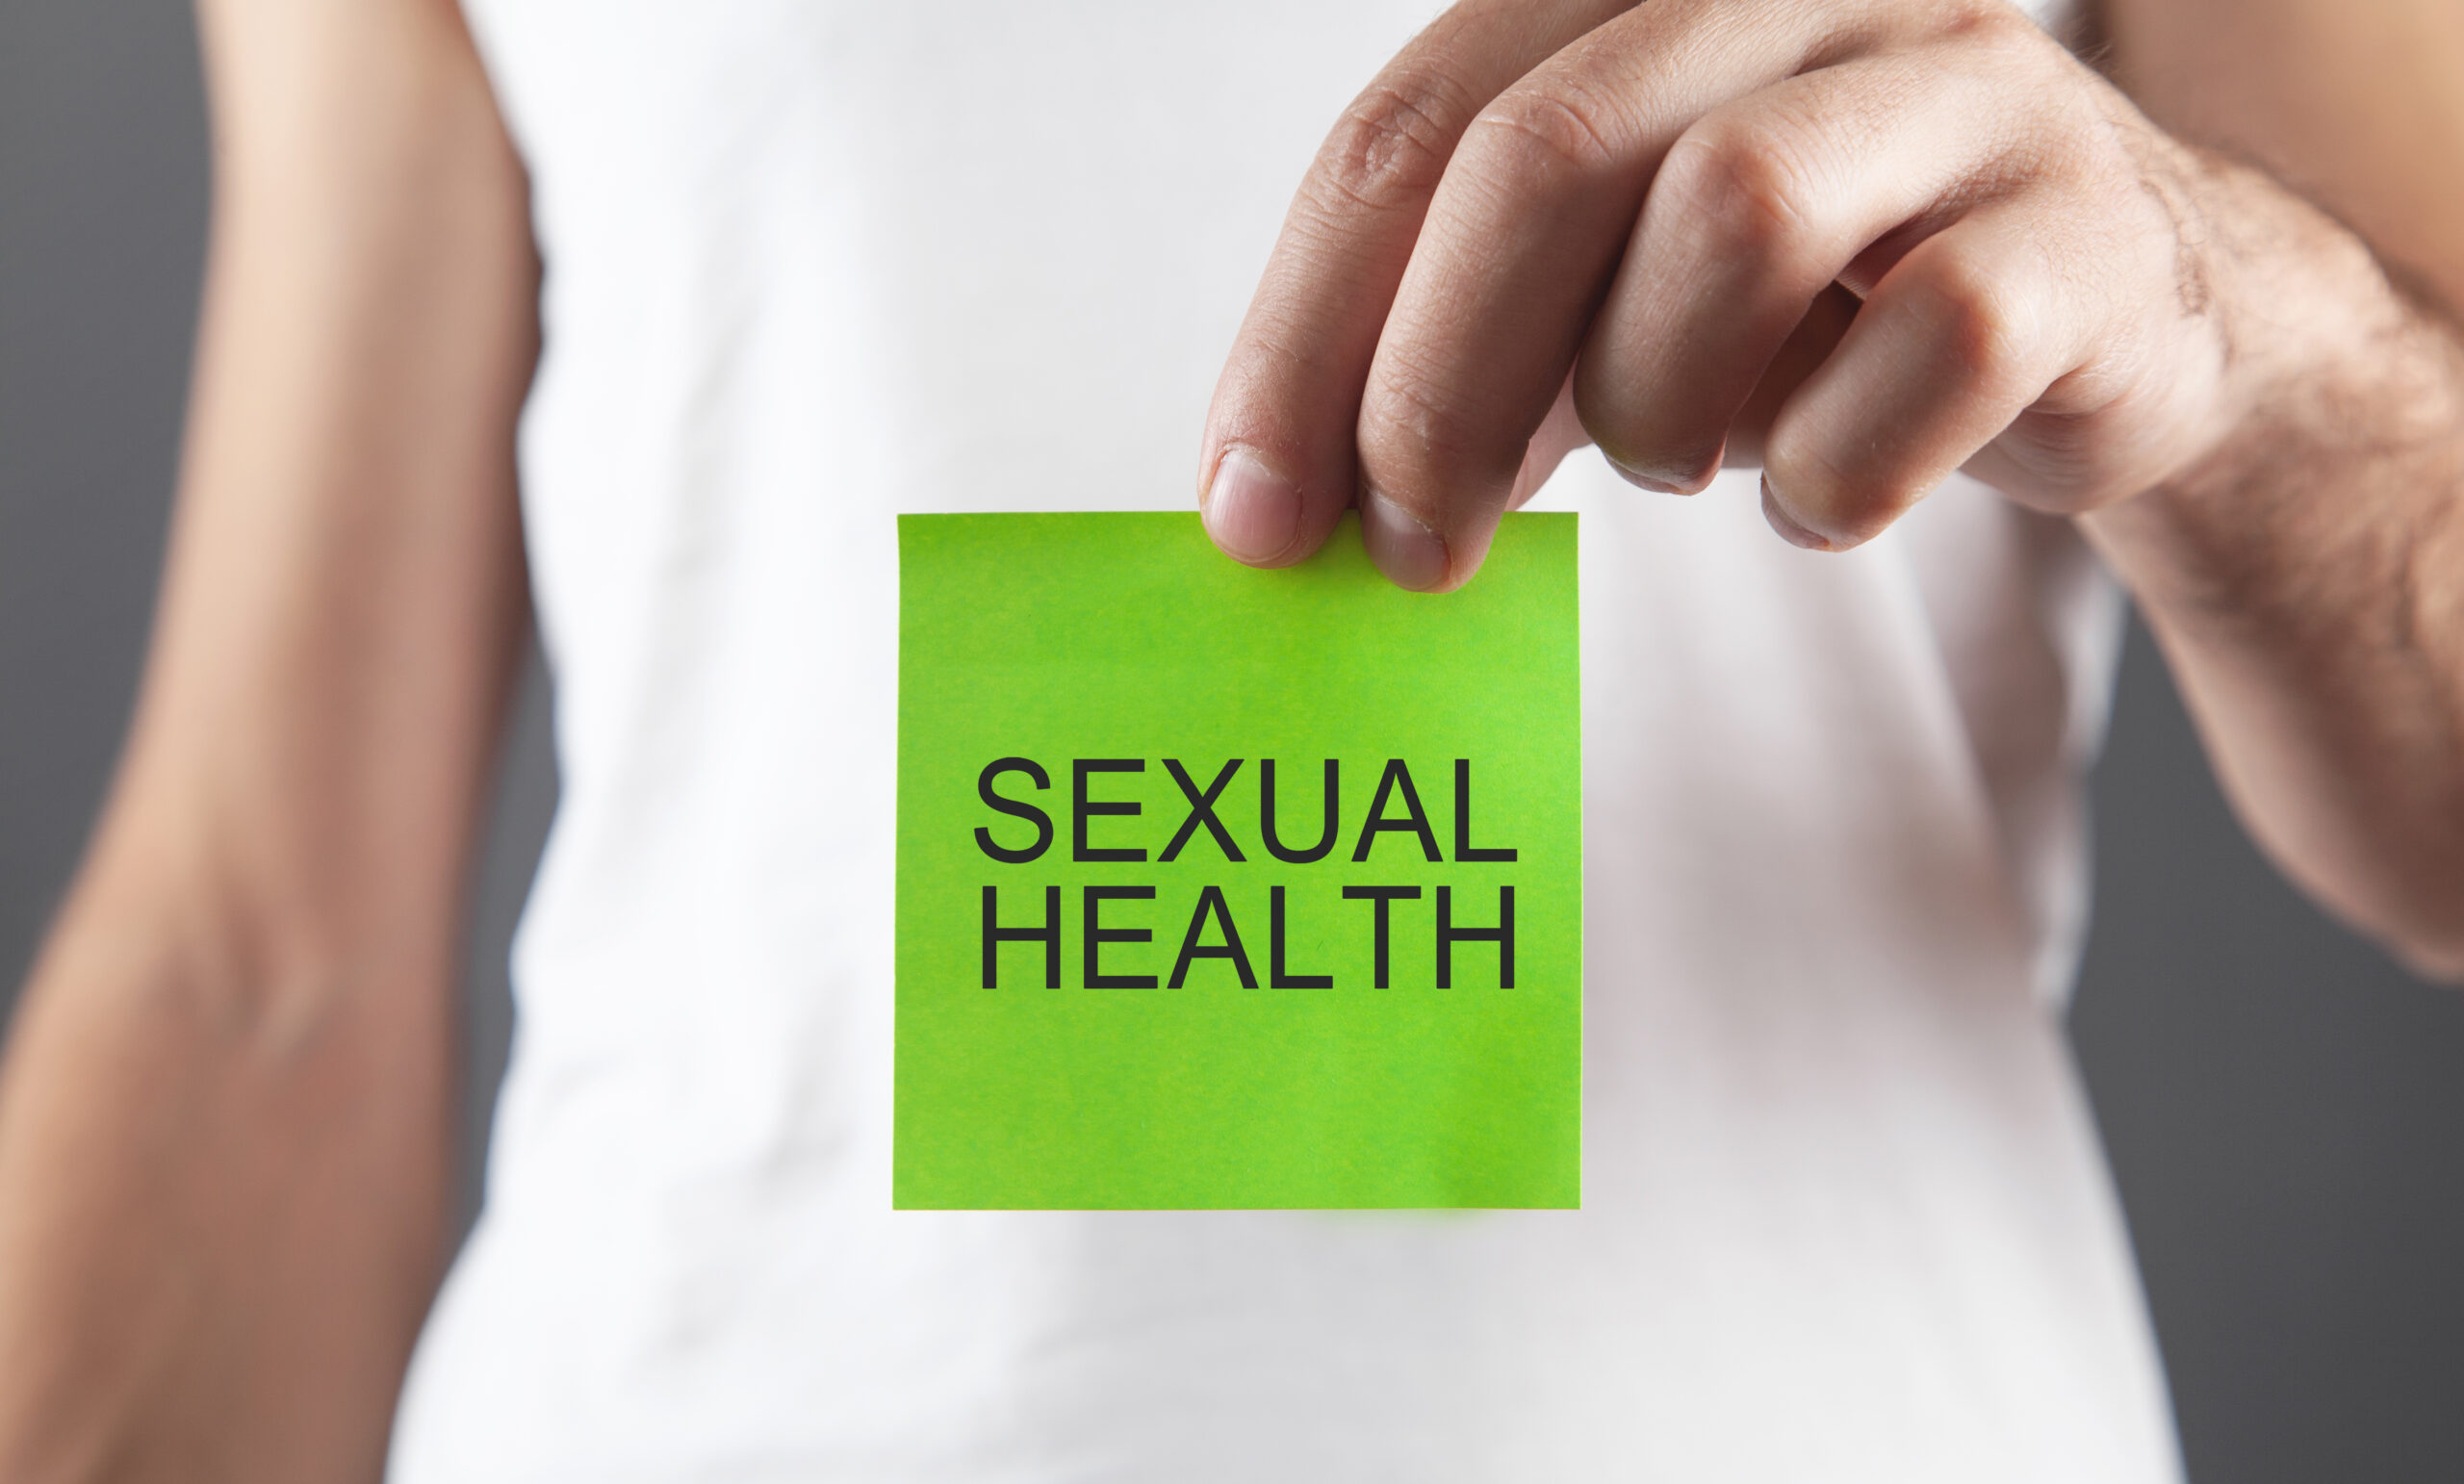 Sexual health for women: common concerns